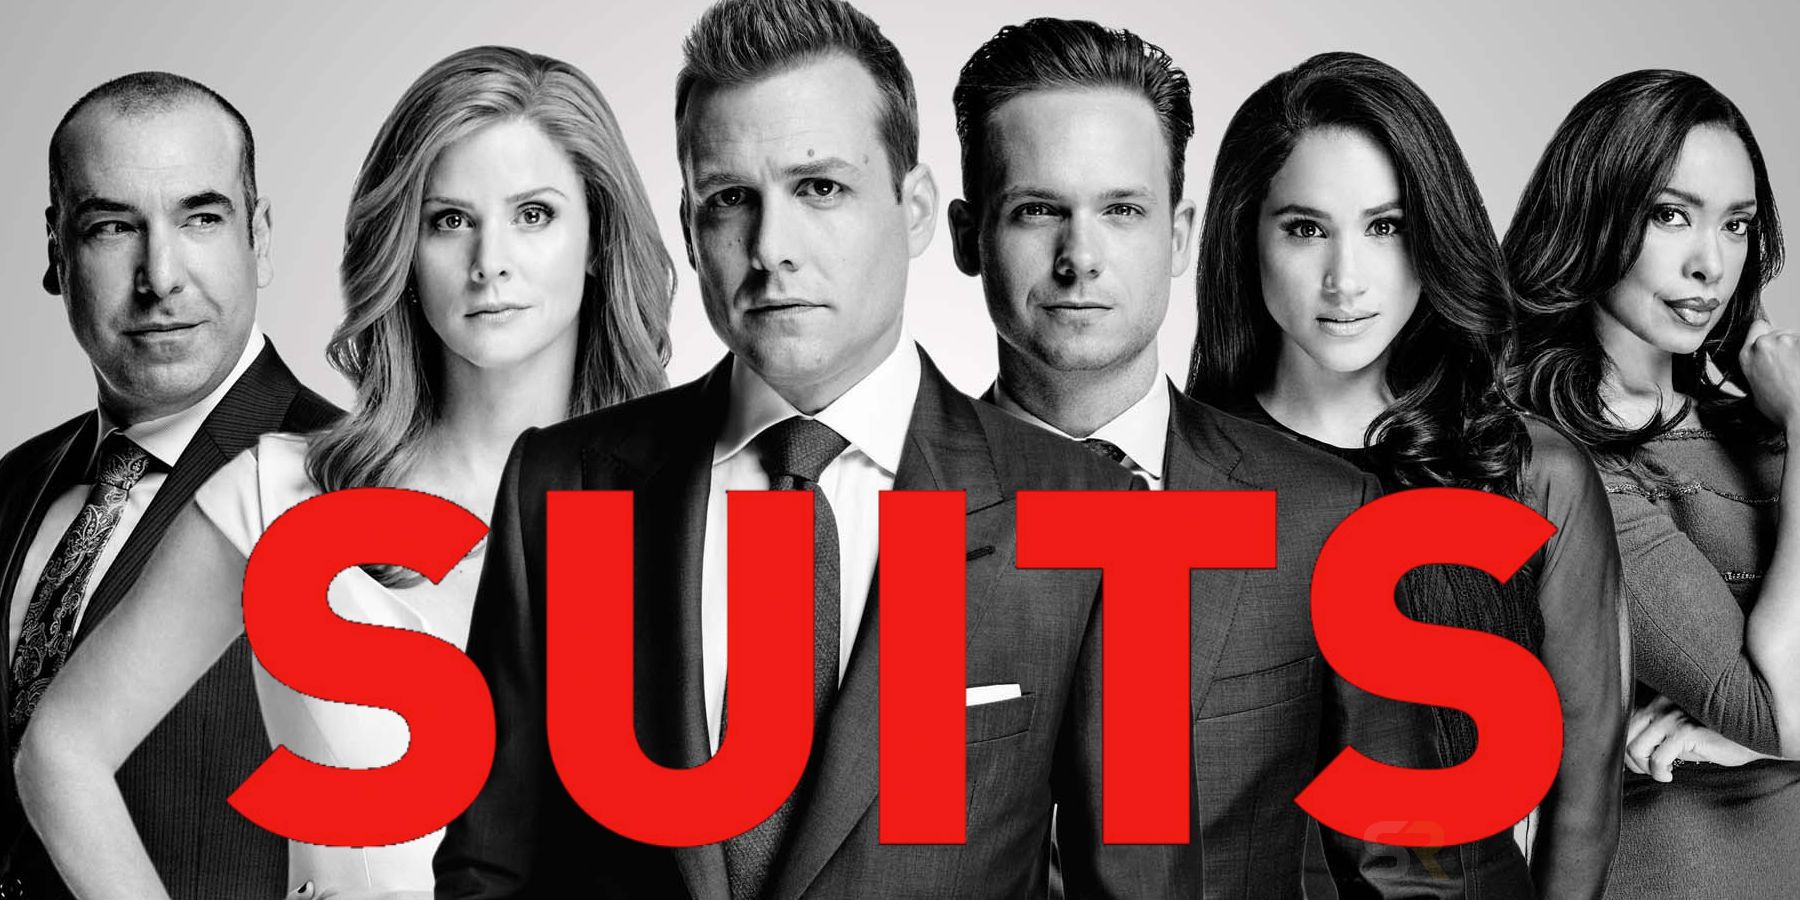 Television shows similar to "Suits"